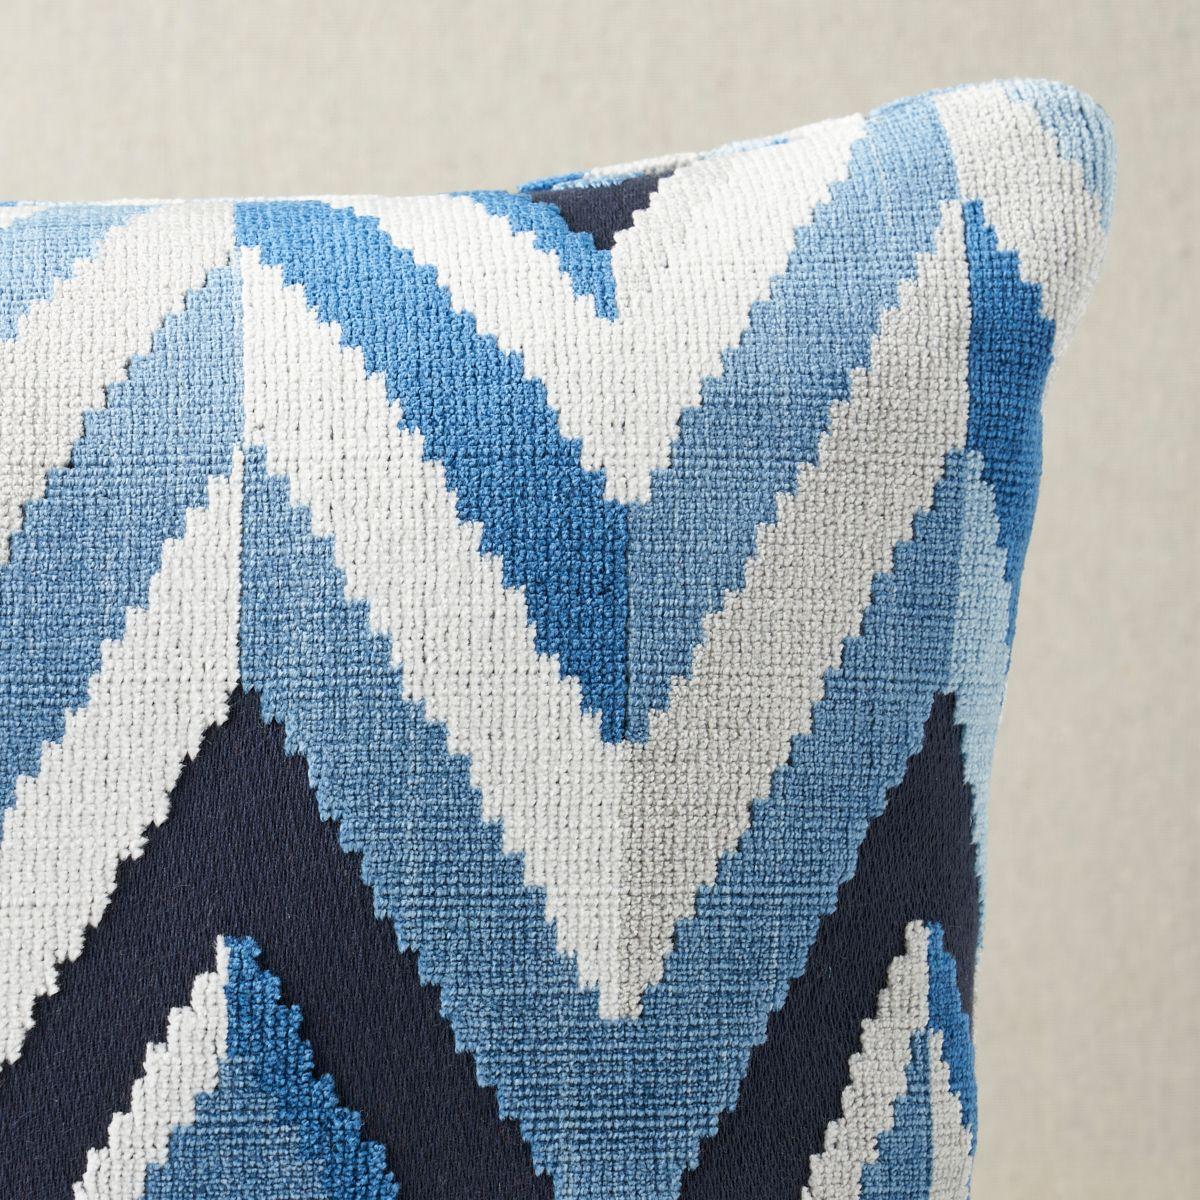 This pillow features Taylor Velvet with a knife edge finish. A fabulous take on a familiar motif, Taylor Velvet in lapis is a dynamic textural design with a unique, sophisticated look. Pillow includes a feather/down fill insert and hidden zipper